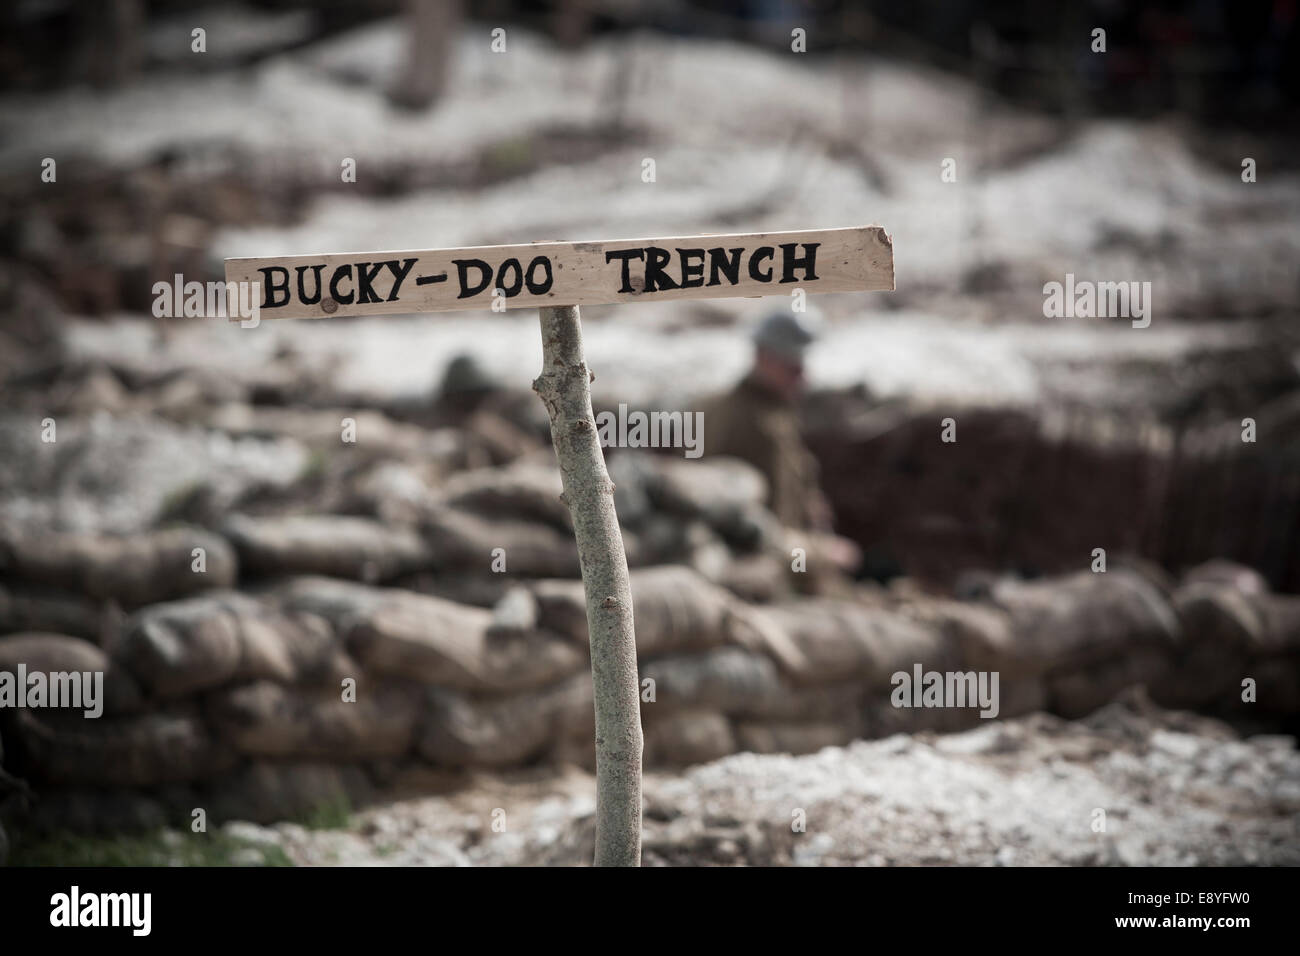 WW1 no mans land recreation, wooden sign for 'Bucky-Doo Trench' in front of sand bags and trenches. Stock Photo